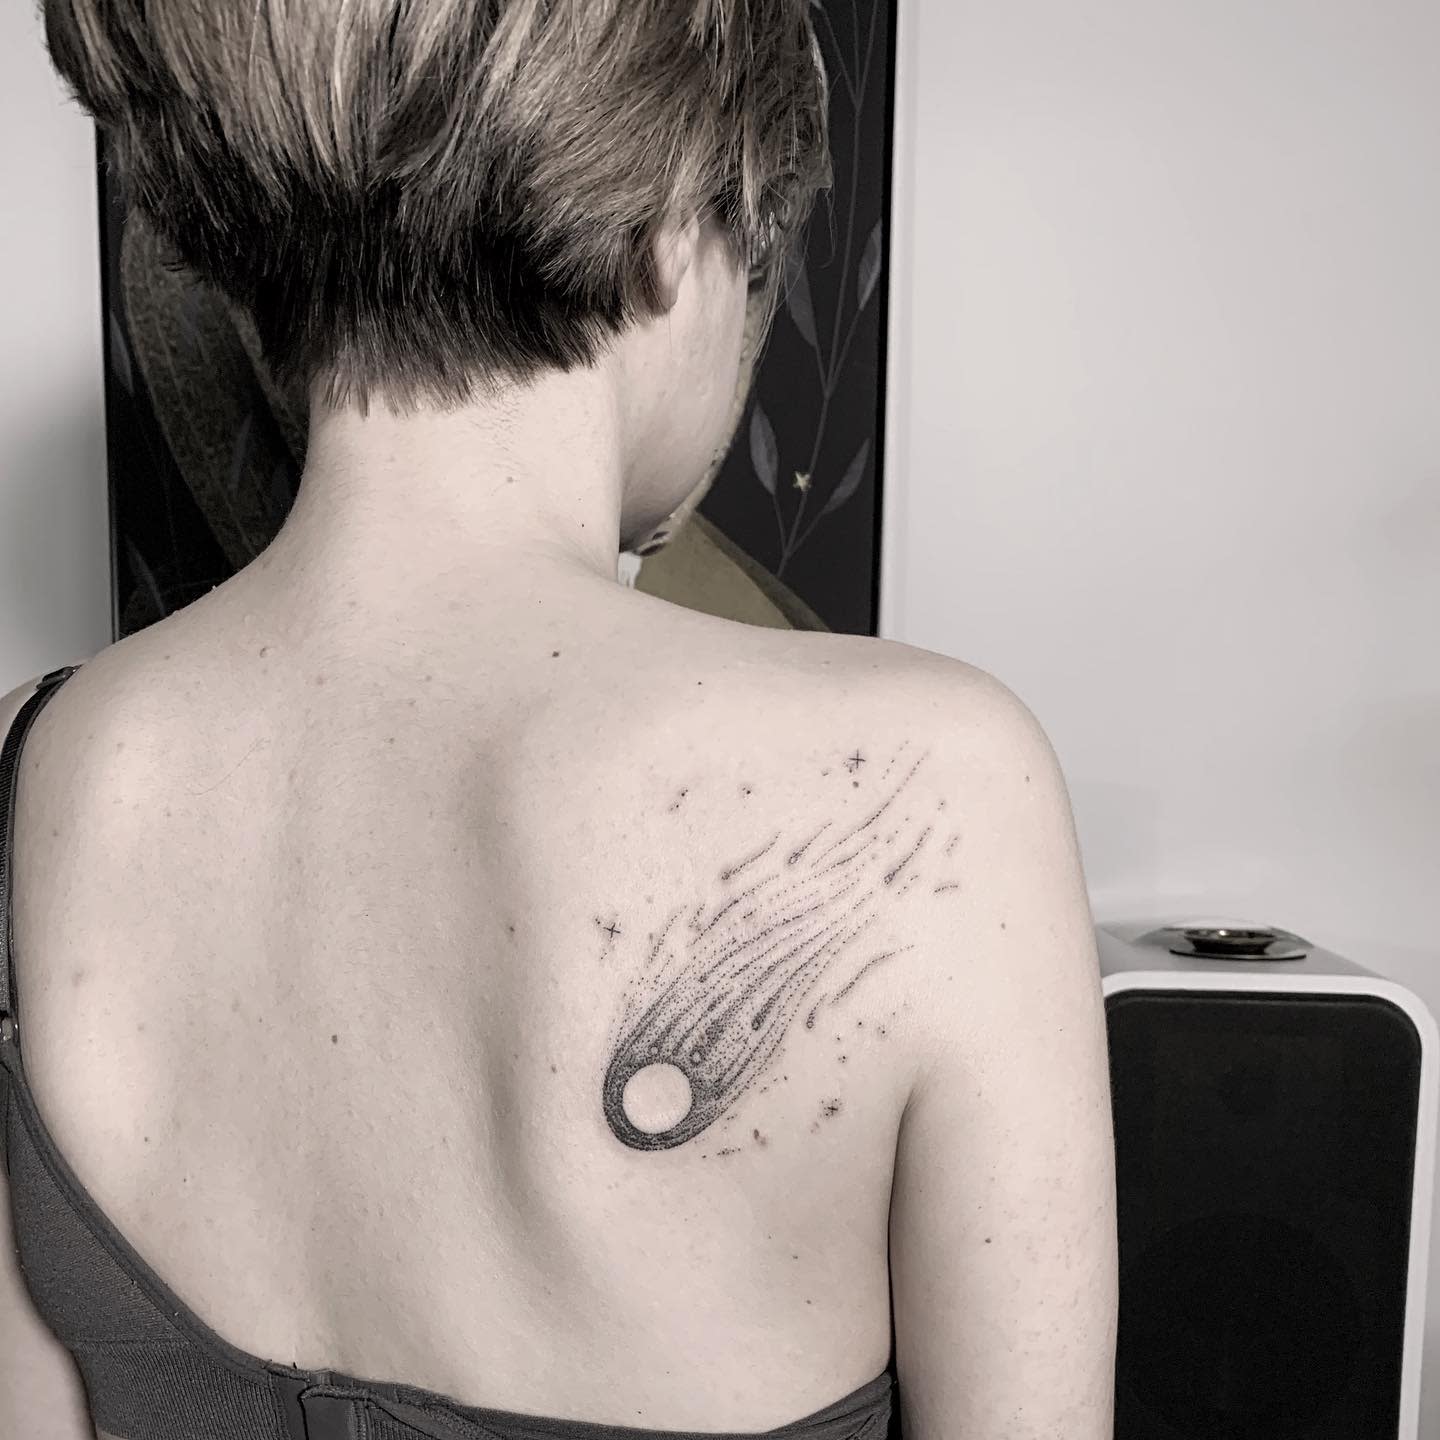 No mistake with shooting star tattoo in 10 examples for females and males